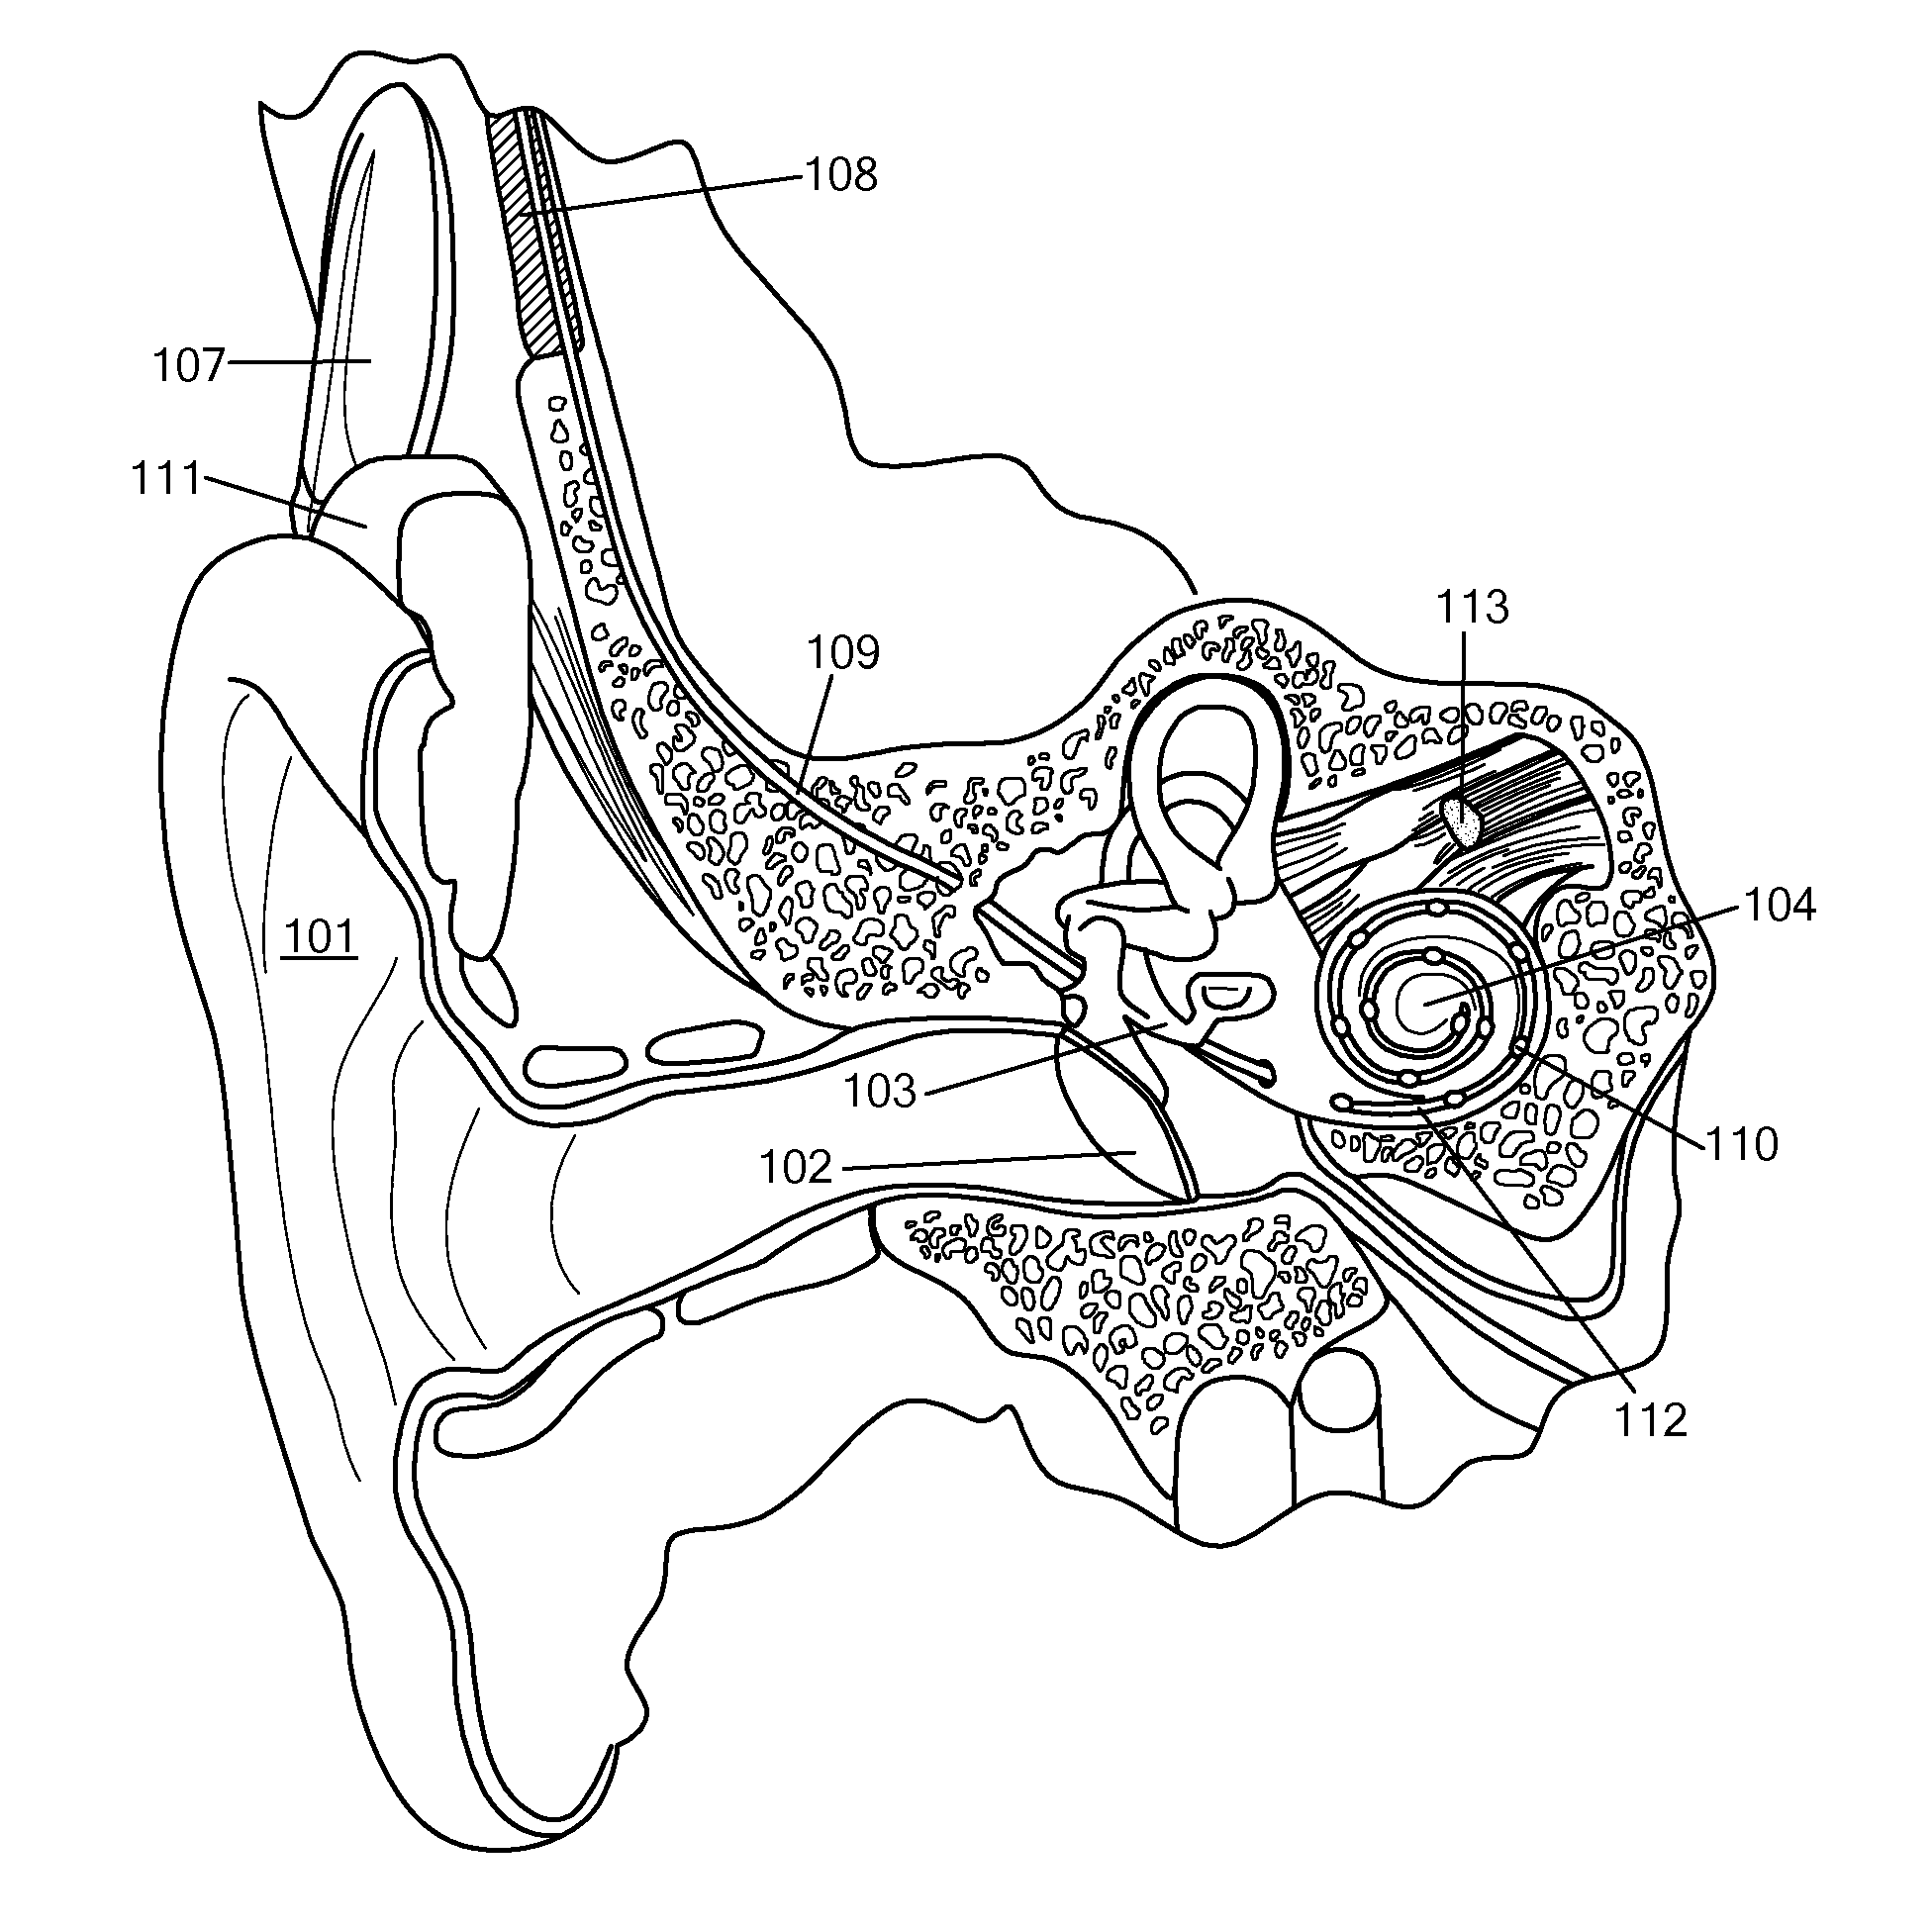 Enhancing Fine Time Structure Transmission for Hearing Implant System